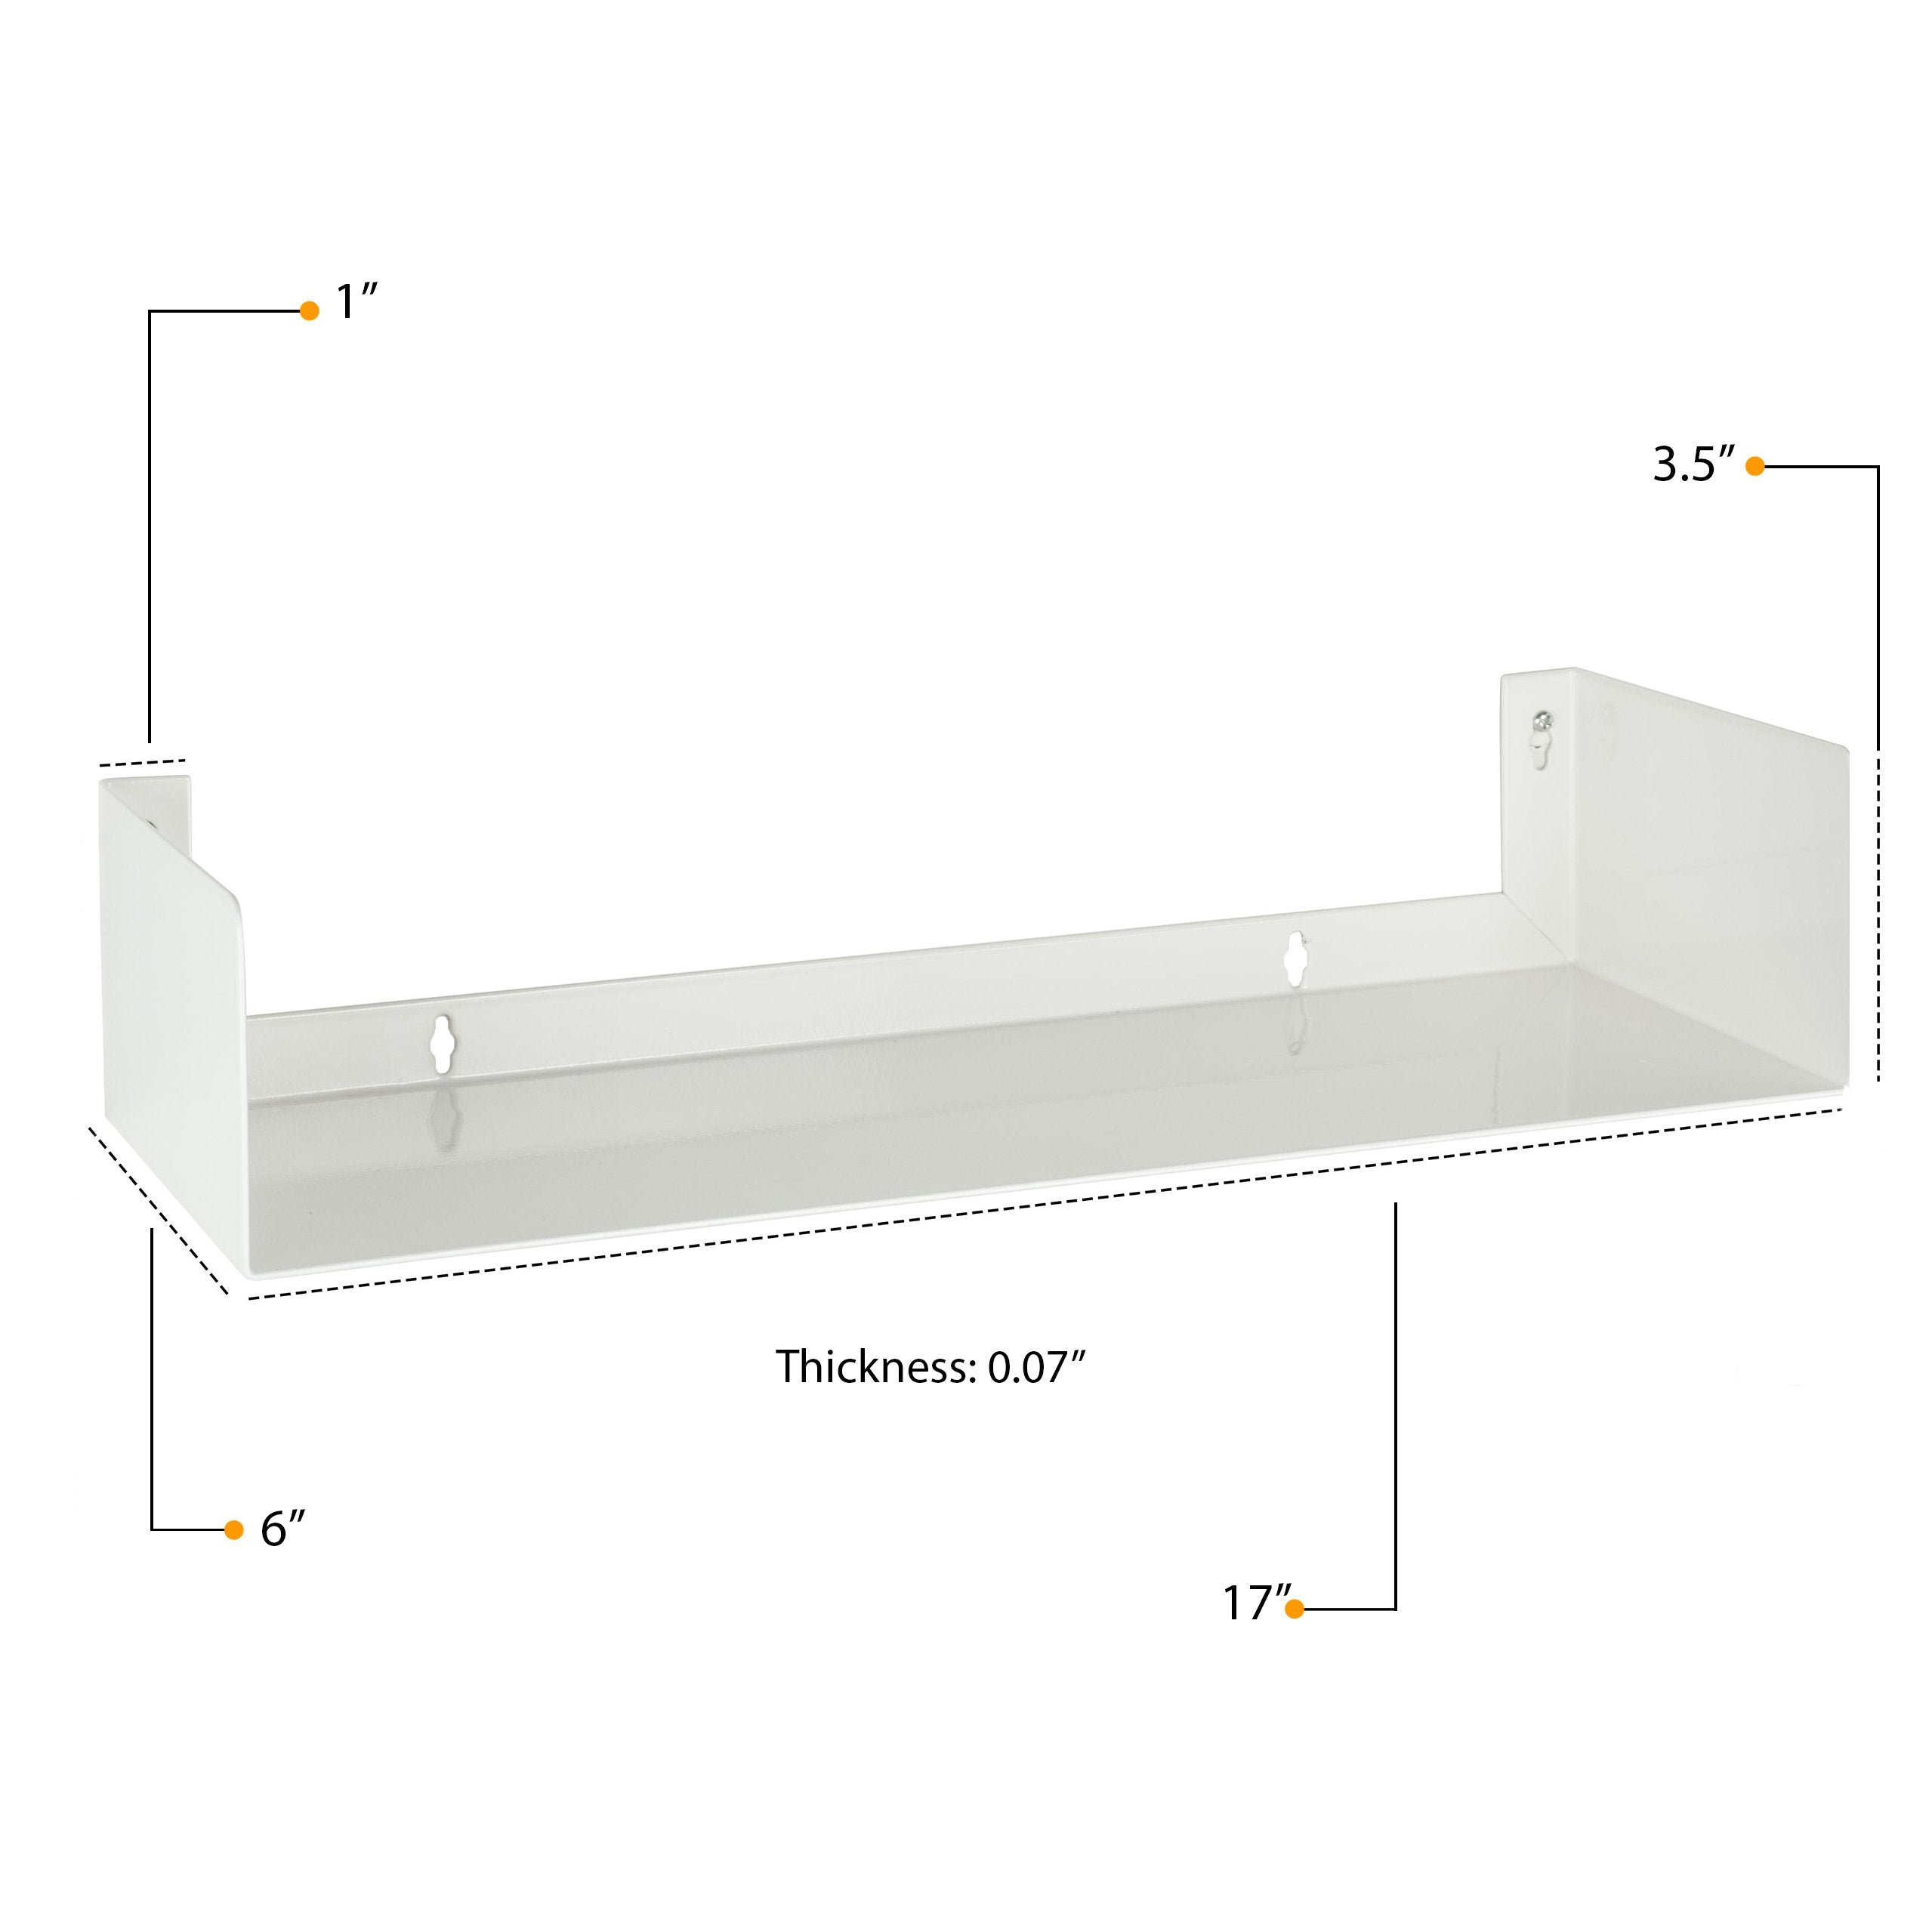 This metal U-shaped shelf white measures 17" in length, 6" in depth, and 3.5" in height, with a 0.07" thickness, perfect for compact storage.